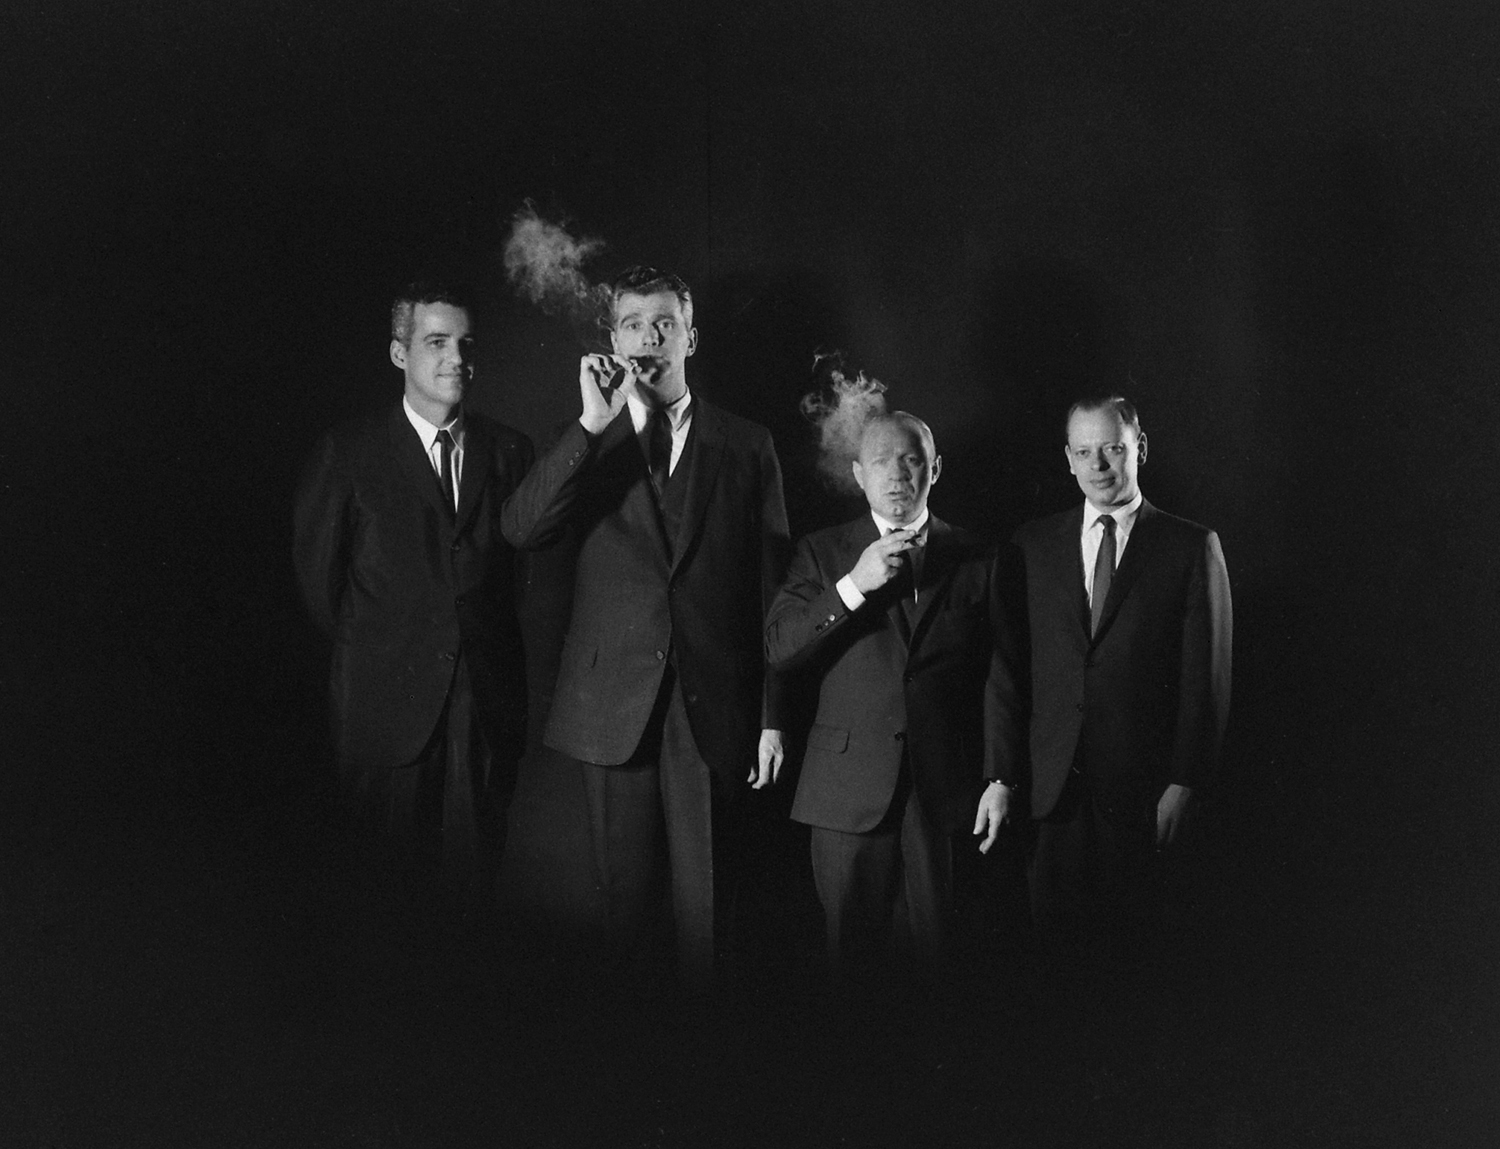 Photo illustrating results of a study conducted by Dr. E. Cuyler Hammond of the American Cancer Society at the time of the Surgeon General's 1964 report on smoking and health.